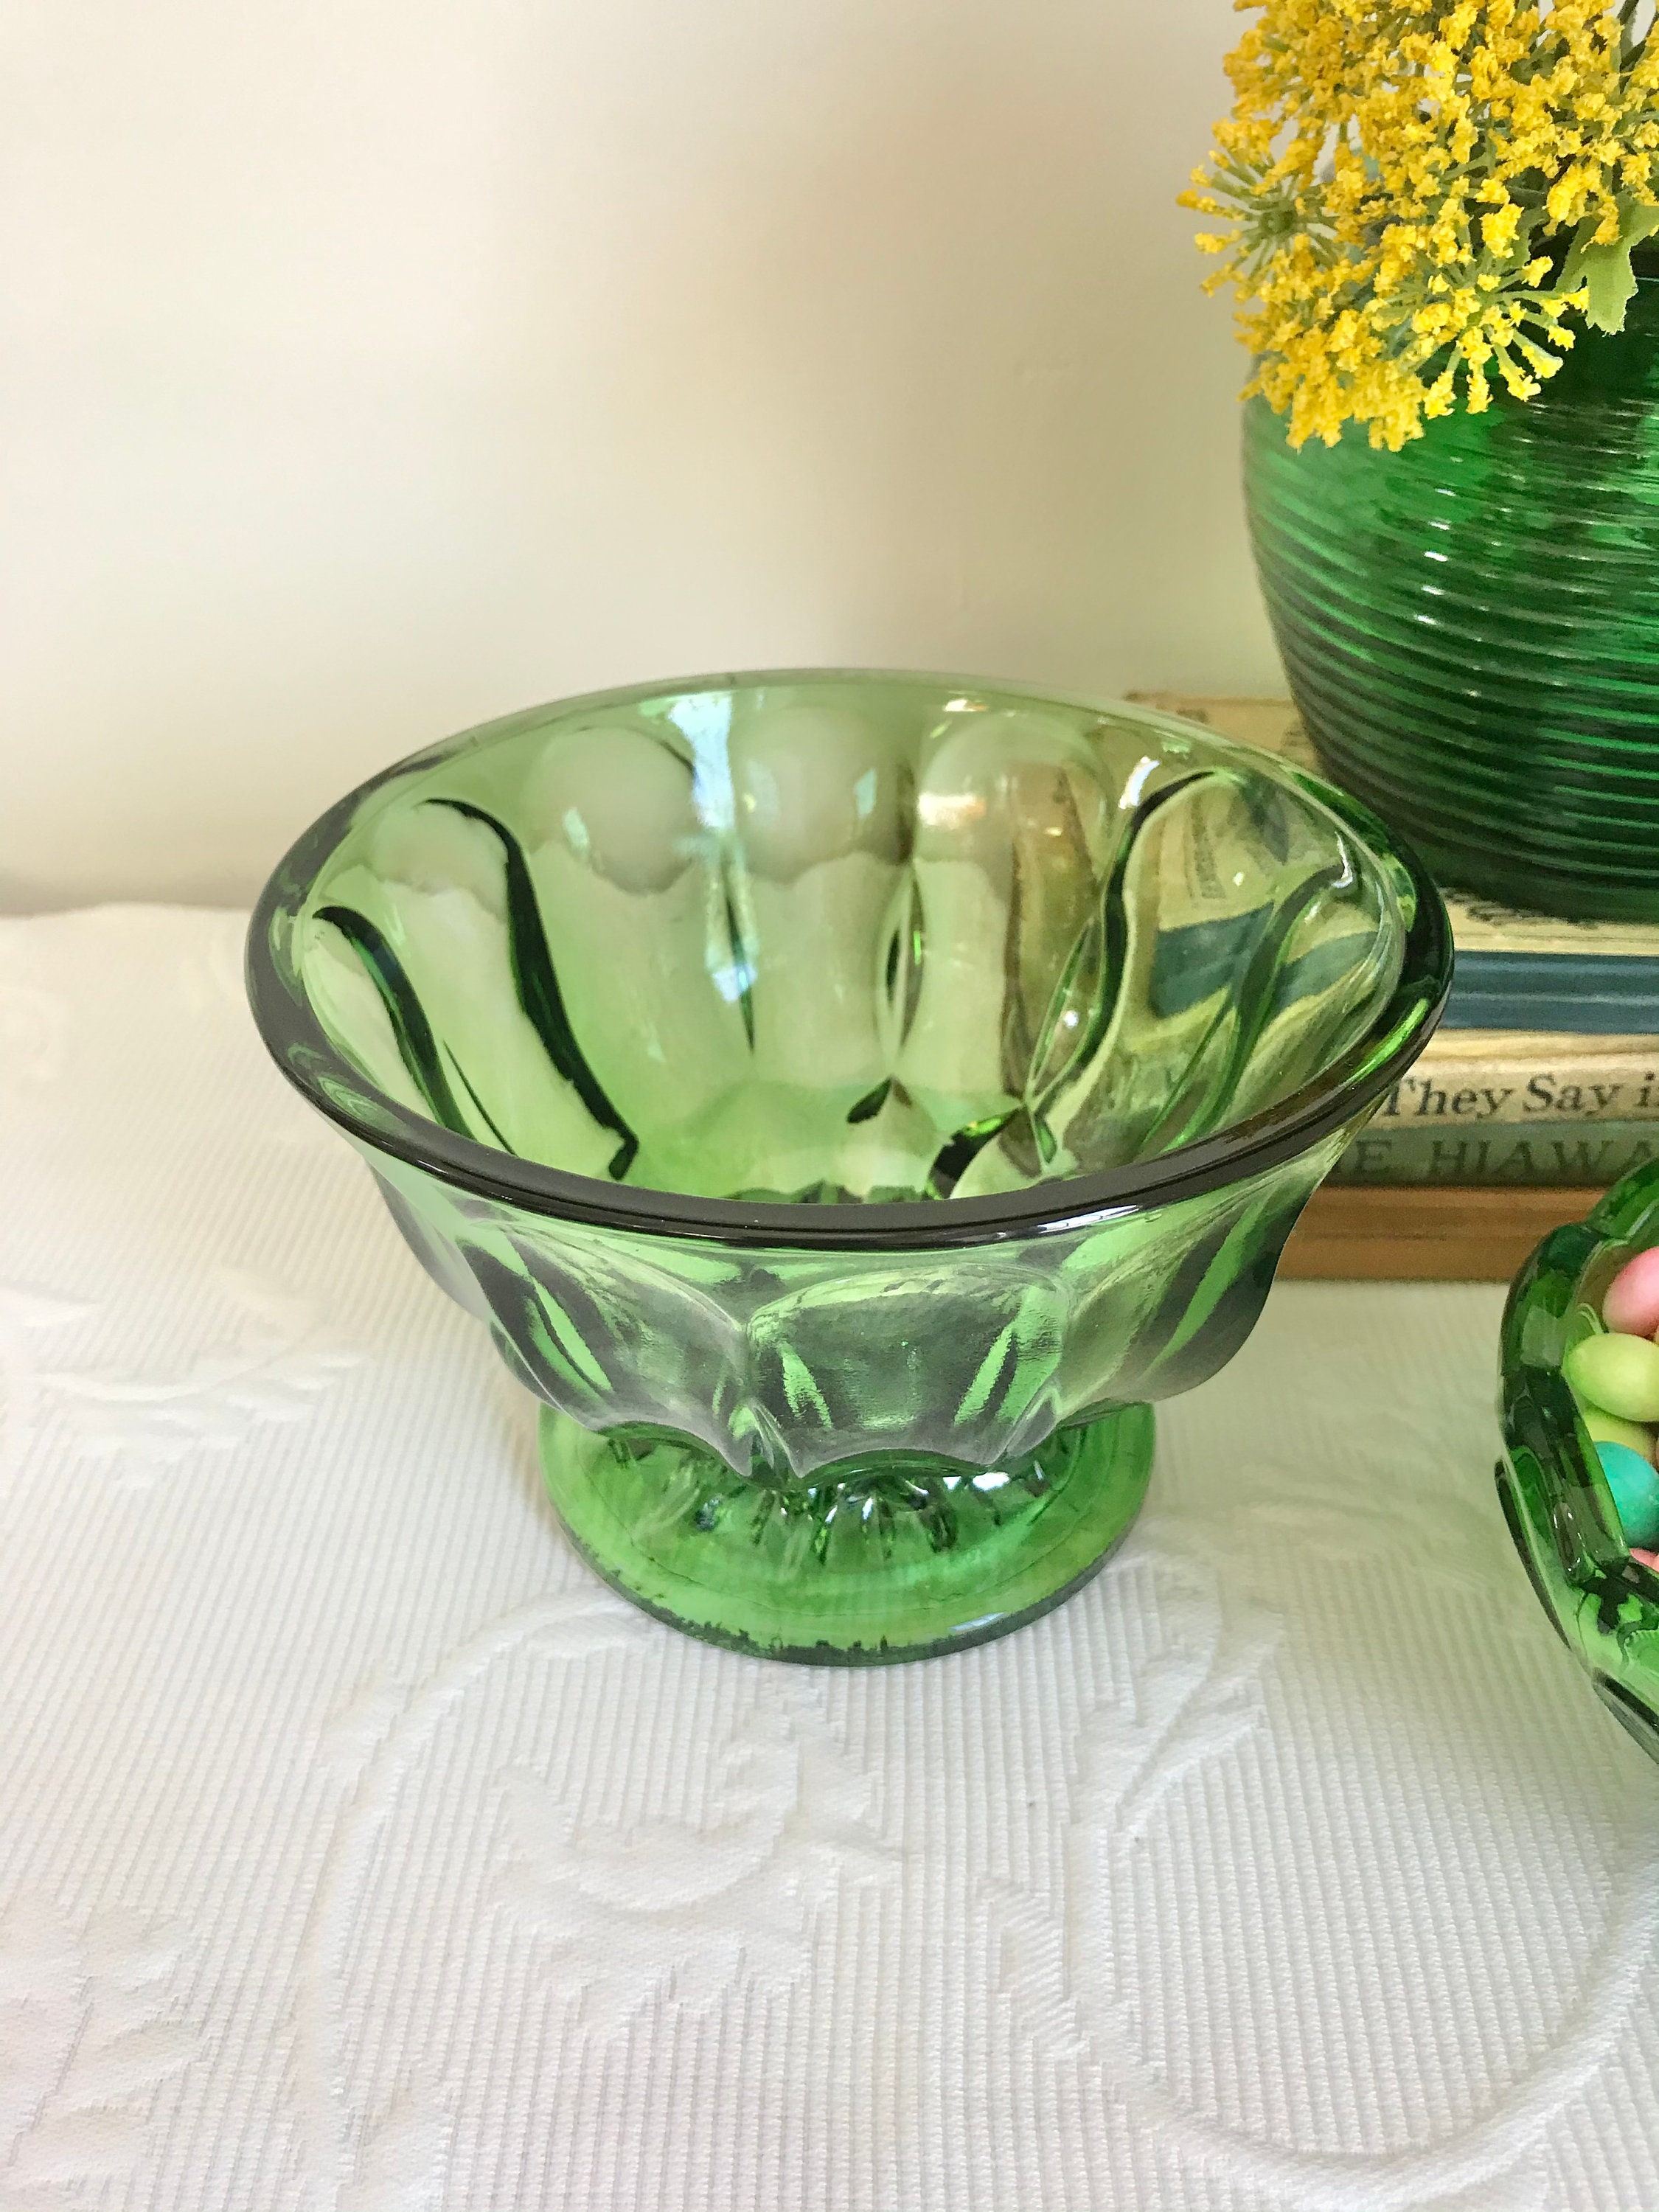 Set of 6 vintage emerald green dishes for wedding reception | Etsy